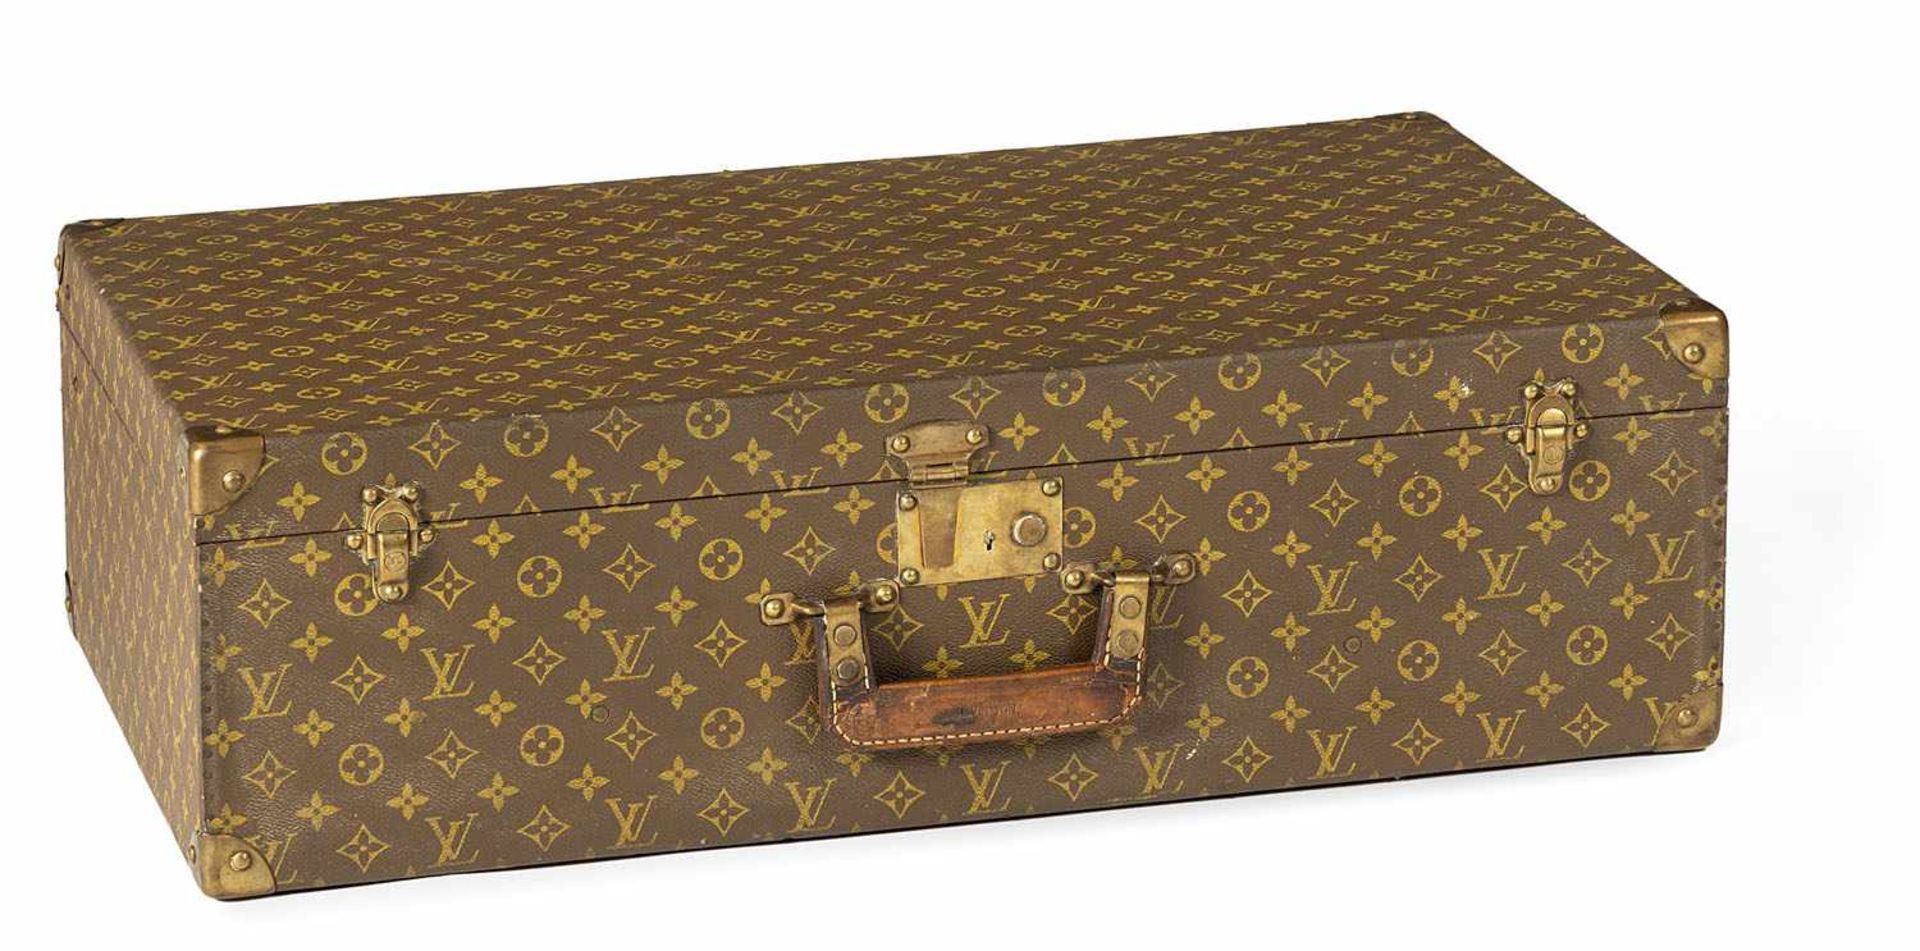 LOUIS VUITTON MONOGRAM CANVAS SUITCASE, probably mid-century. Traces of use, minor damages due to